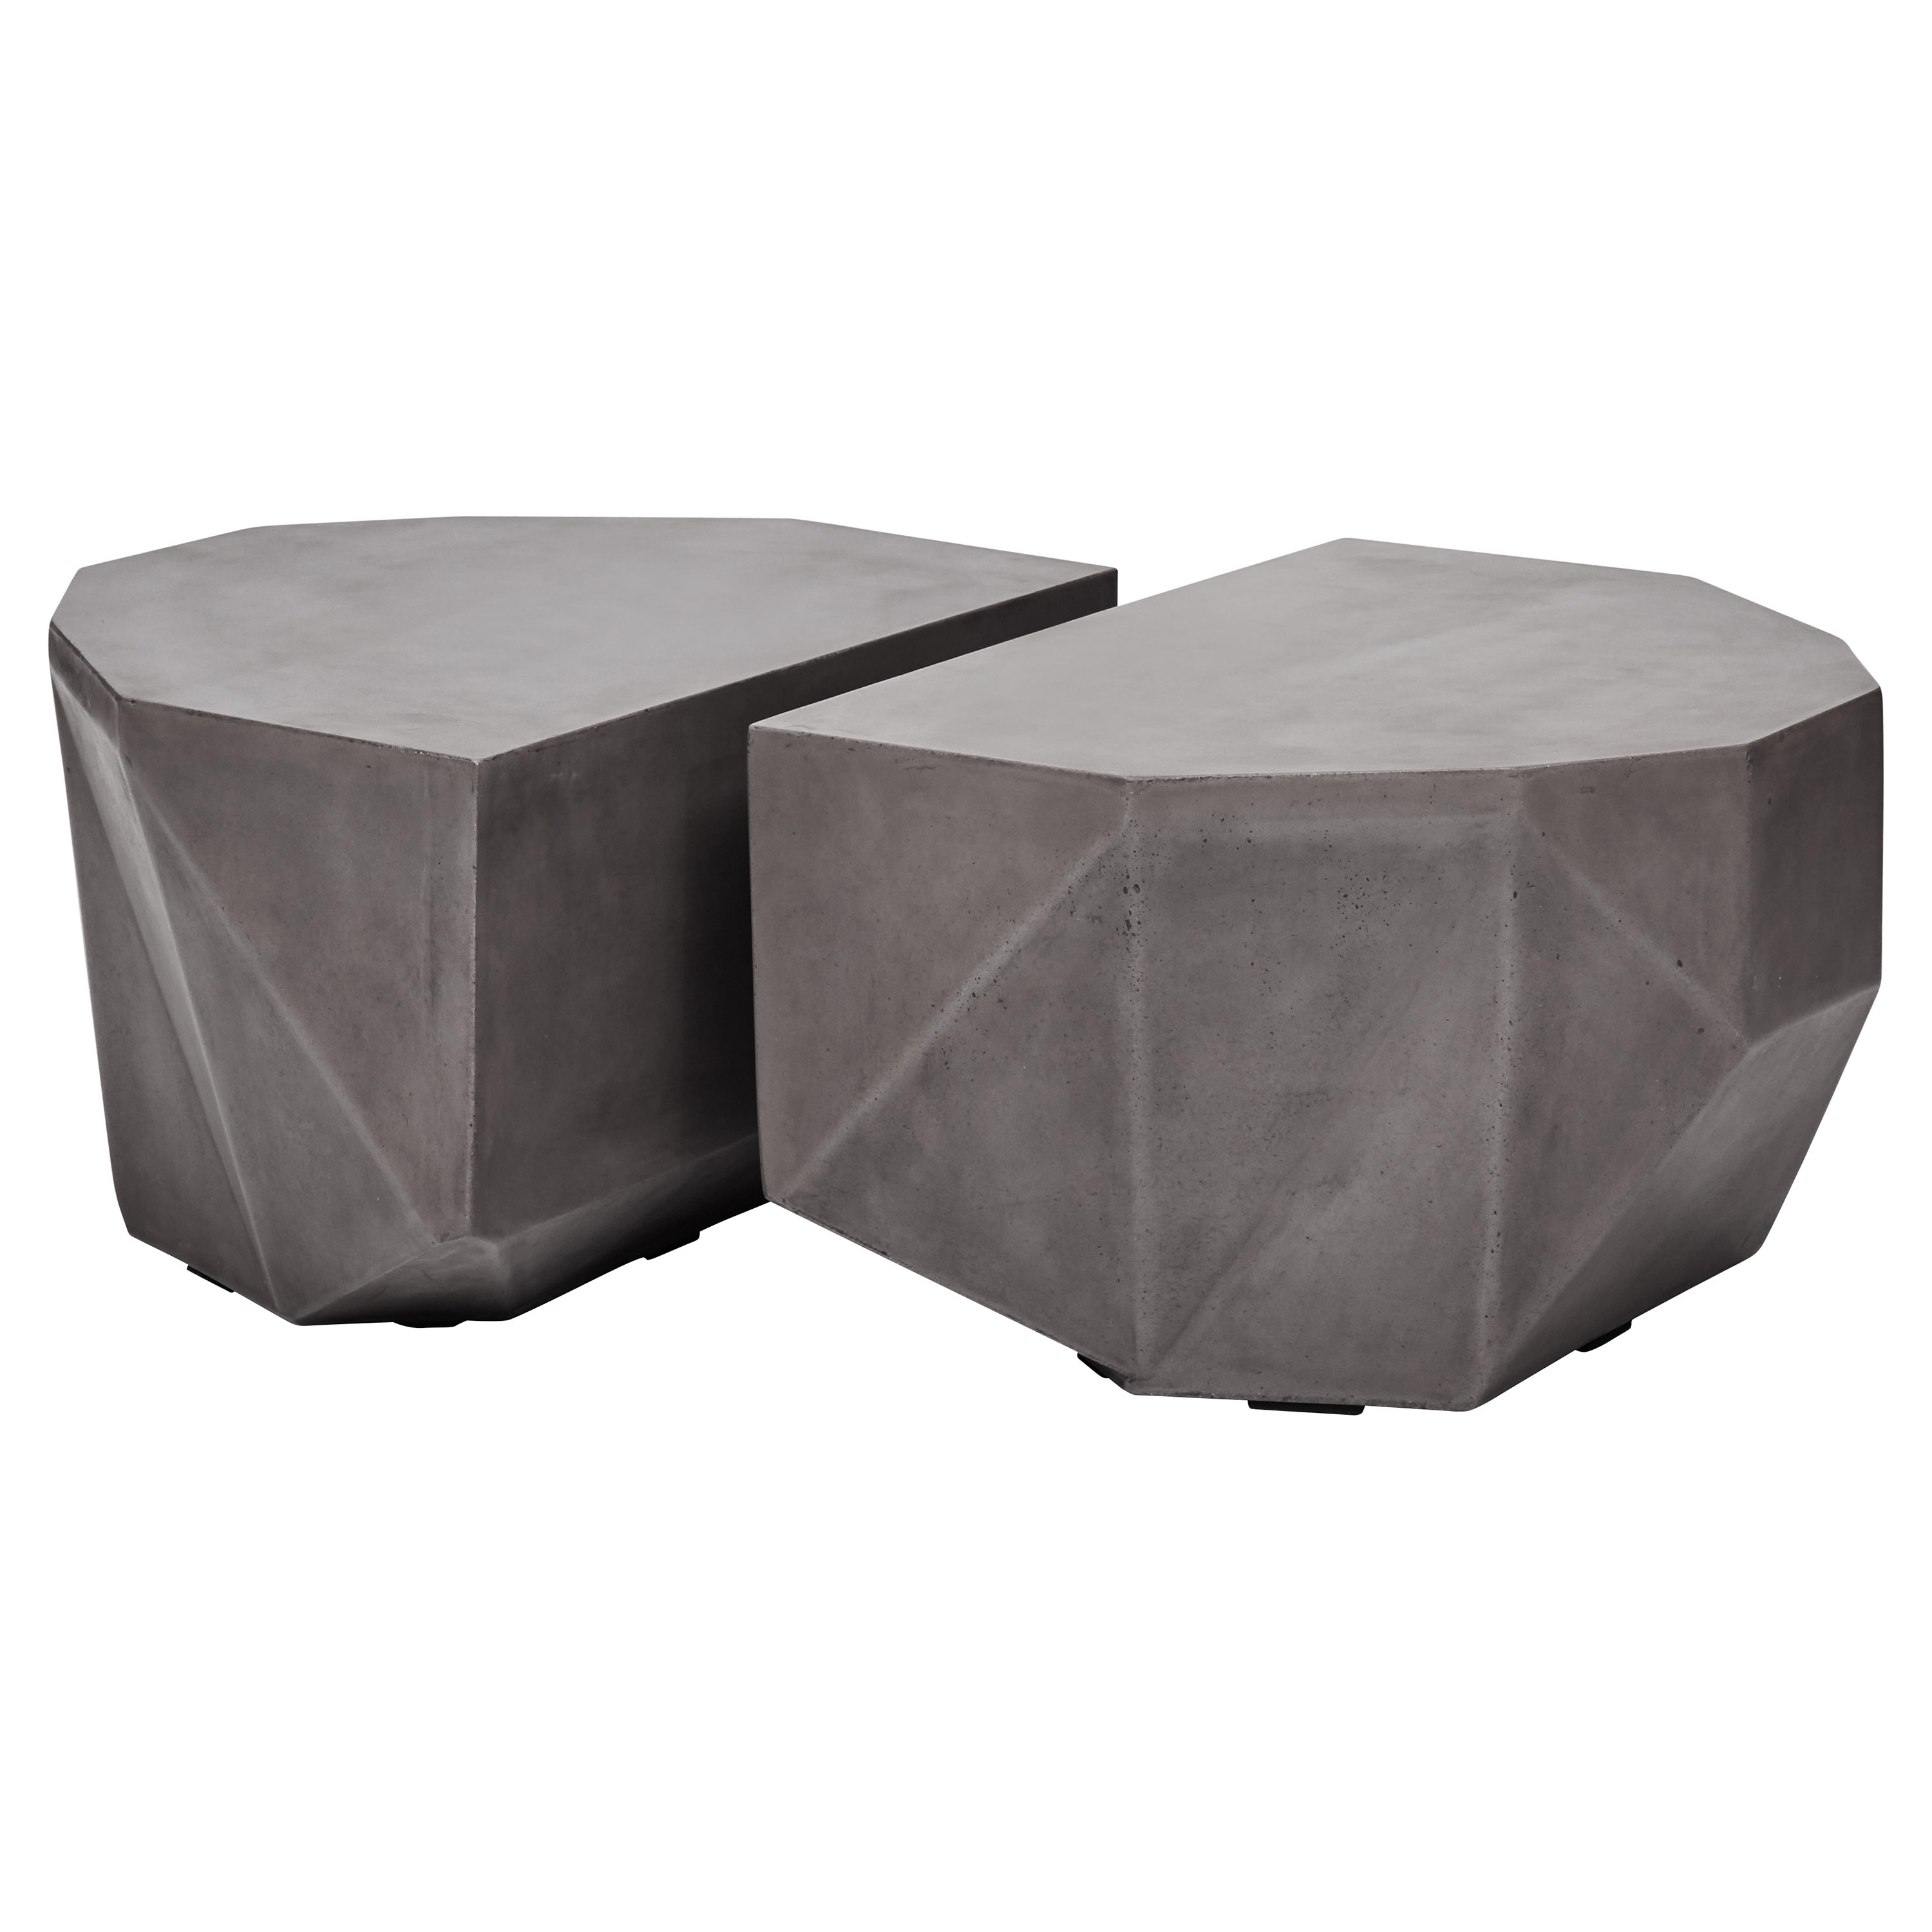 Lily Modern Classic Dark Grey Geometric Outdoor Coffee Table - Set of 2 - Image 1